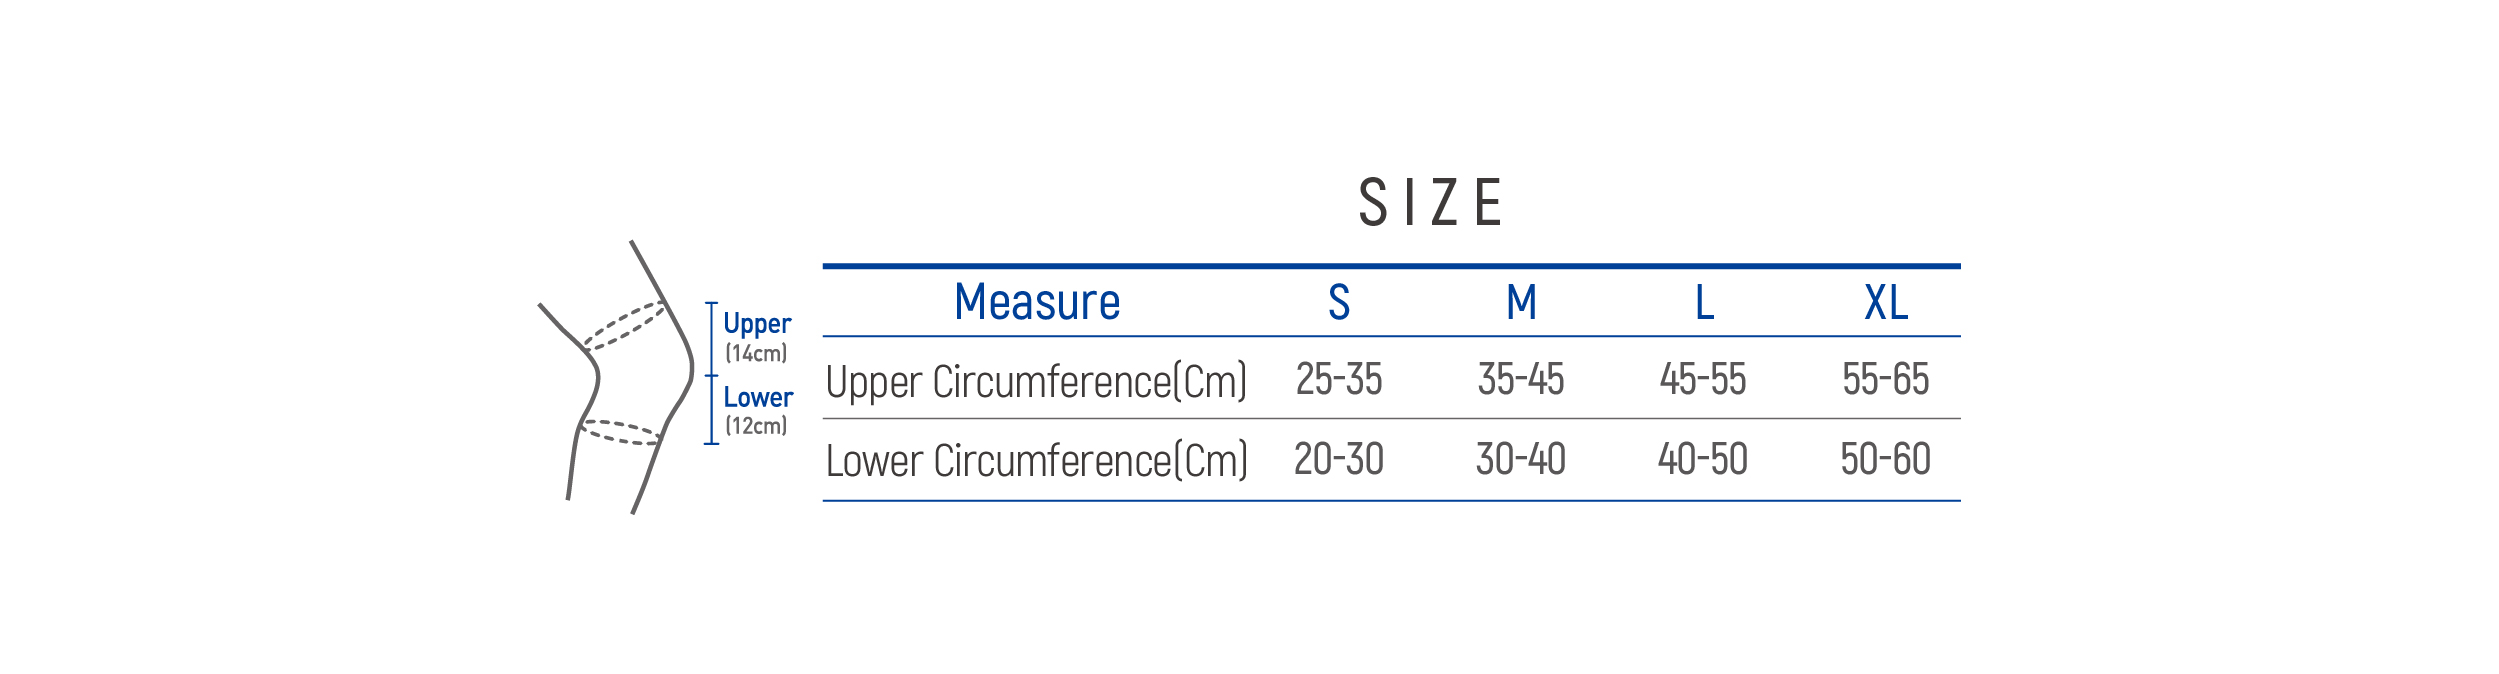 DR-K070 Size table image